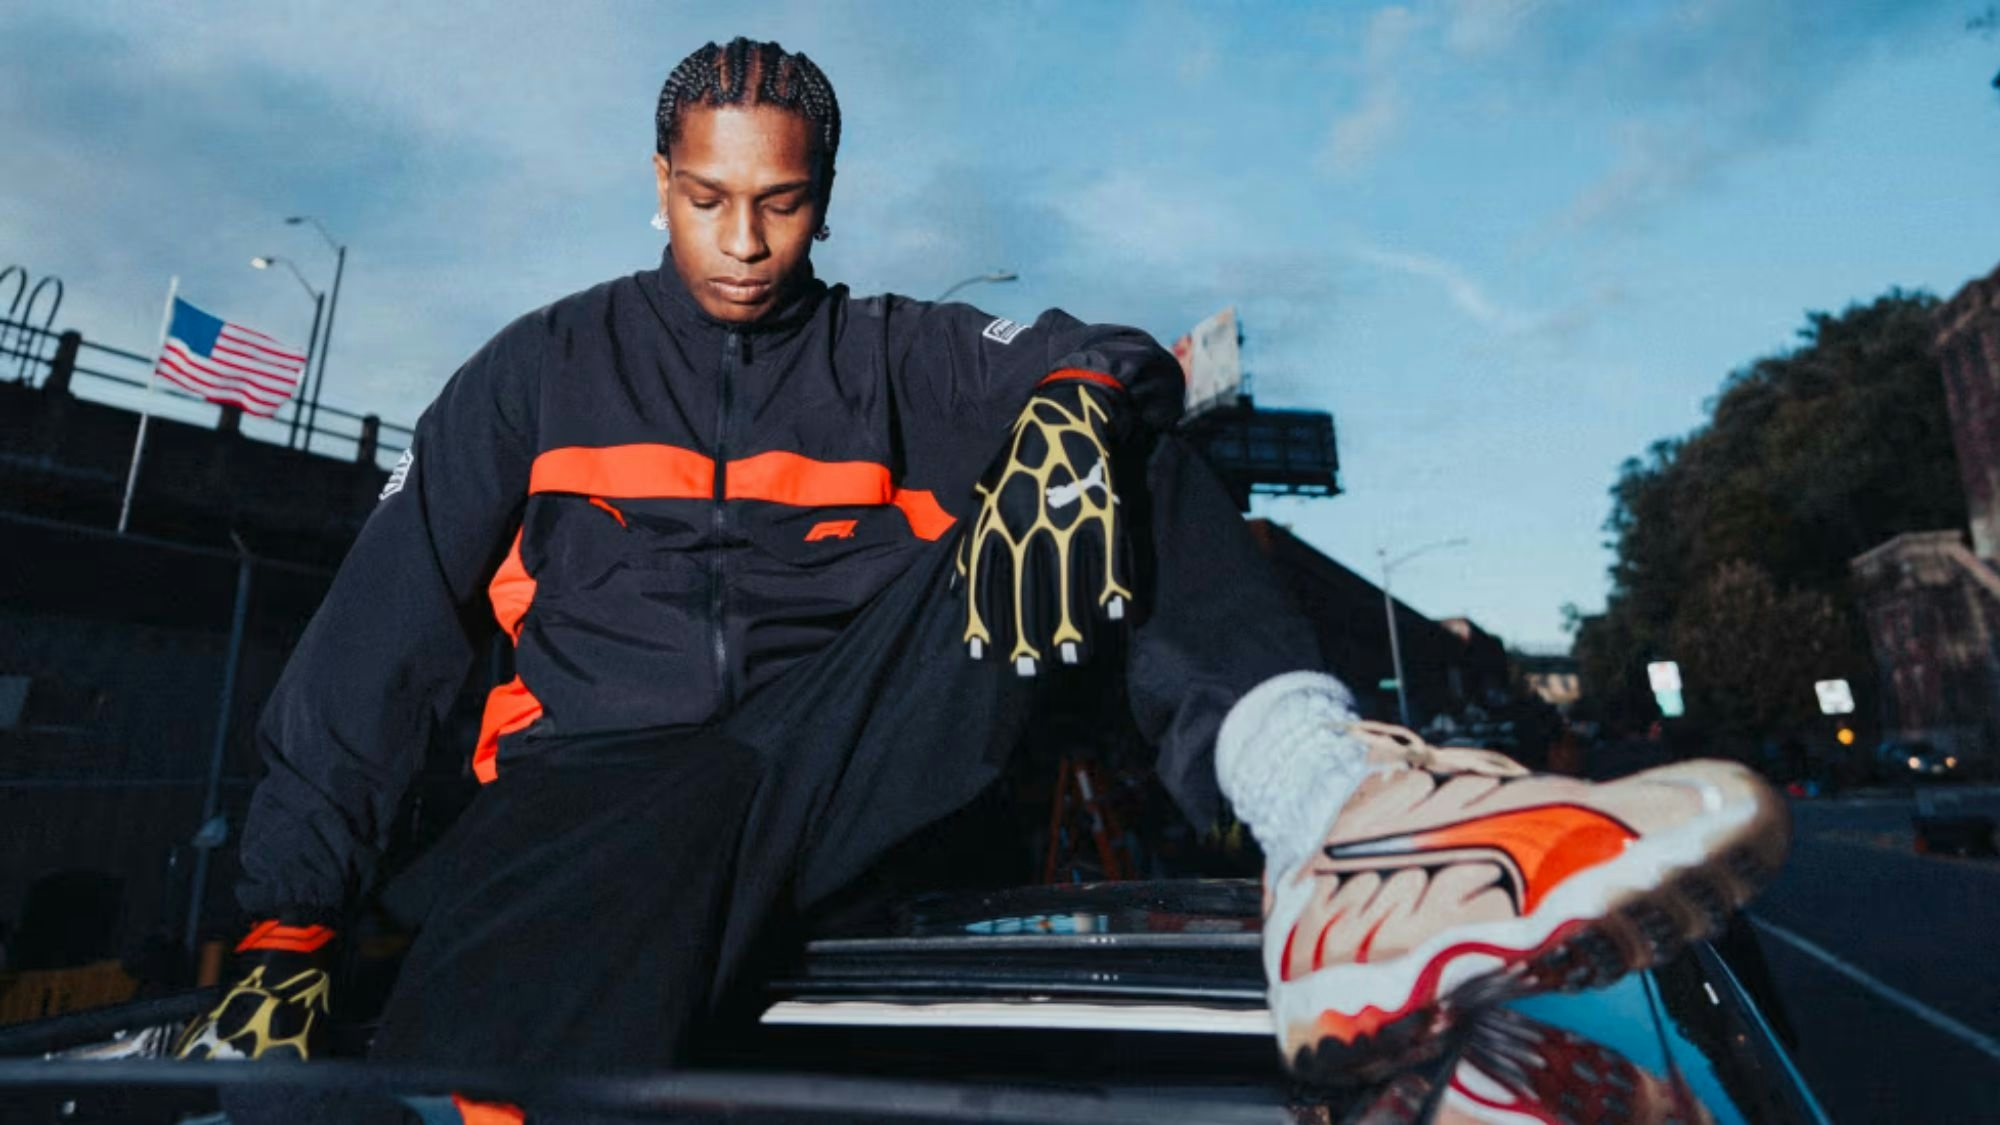 Last month, news circulated online of A$AP Rocky being named creative director at Puma, focusing on the F1 partnership. Photo: Puma